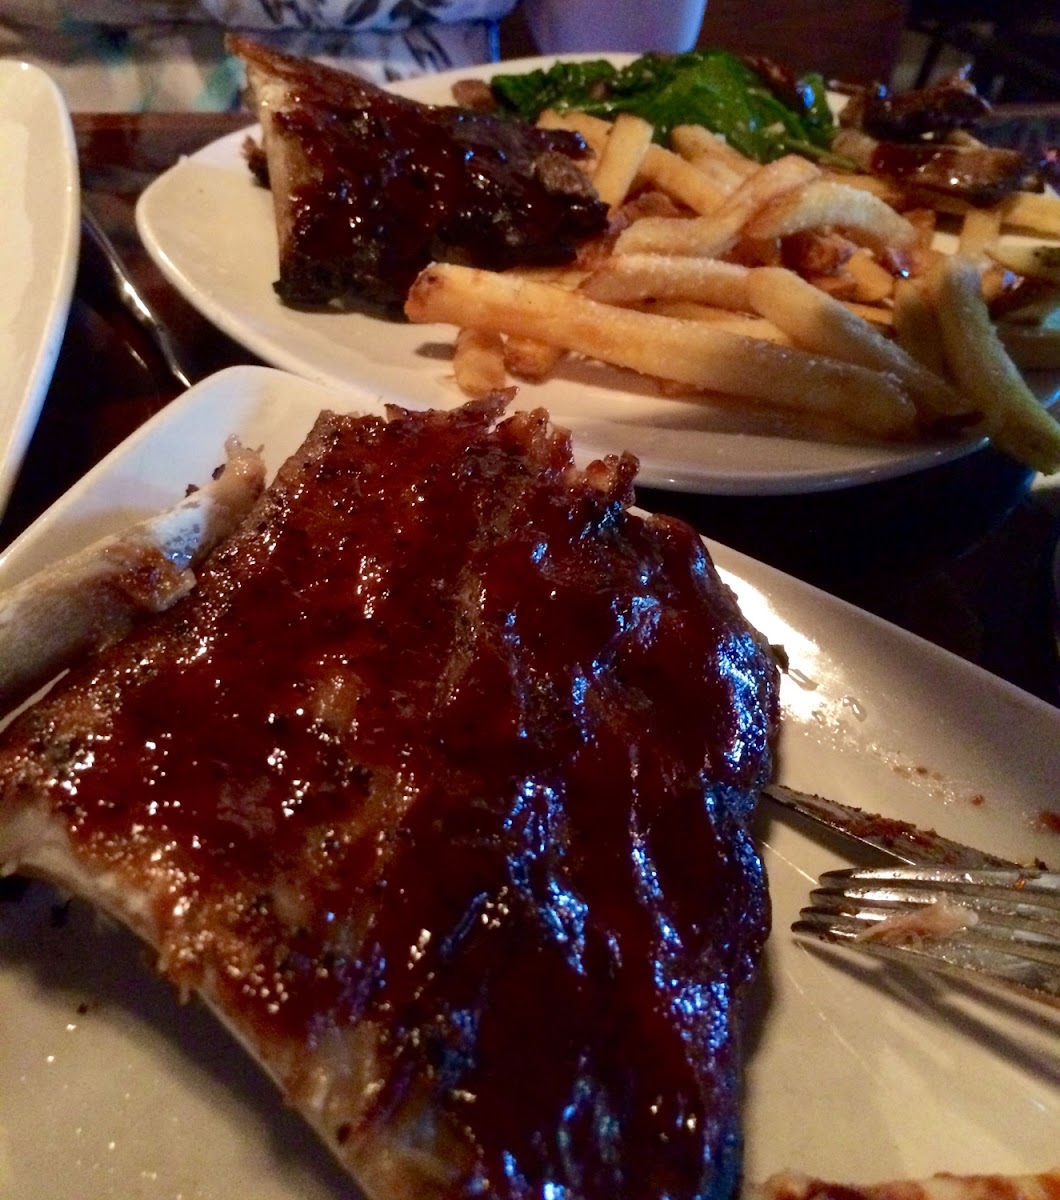 Spare ribs with truffle fries and sautéed spinach and mushrooms